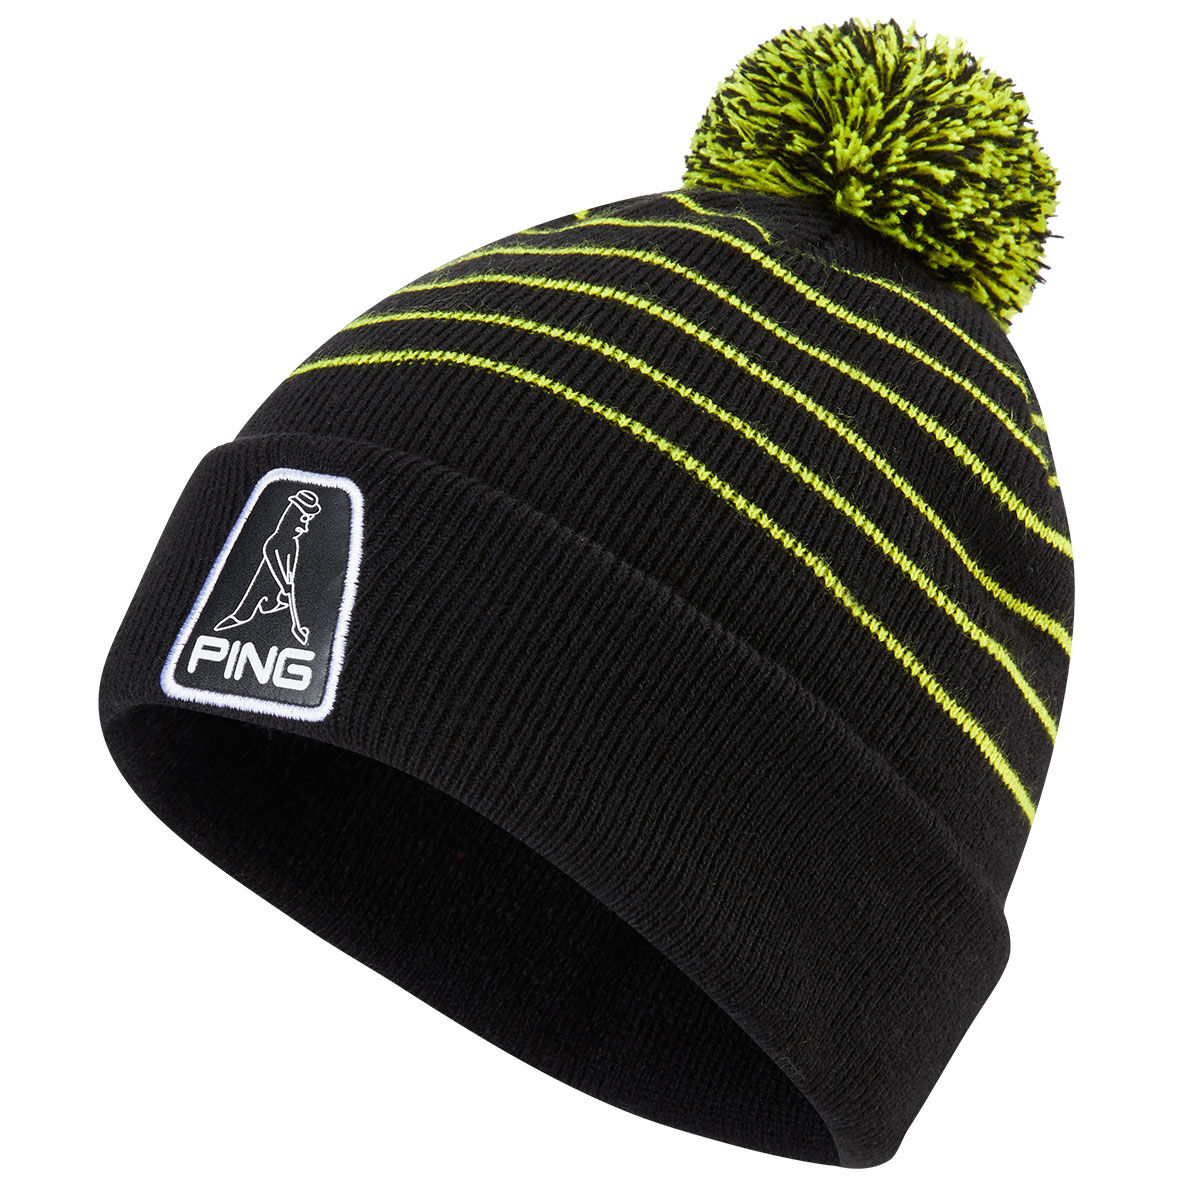 PING Men’s Mr Ping Bobble Hat, Mens, Black/neon yellow, One size | American Golf